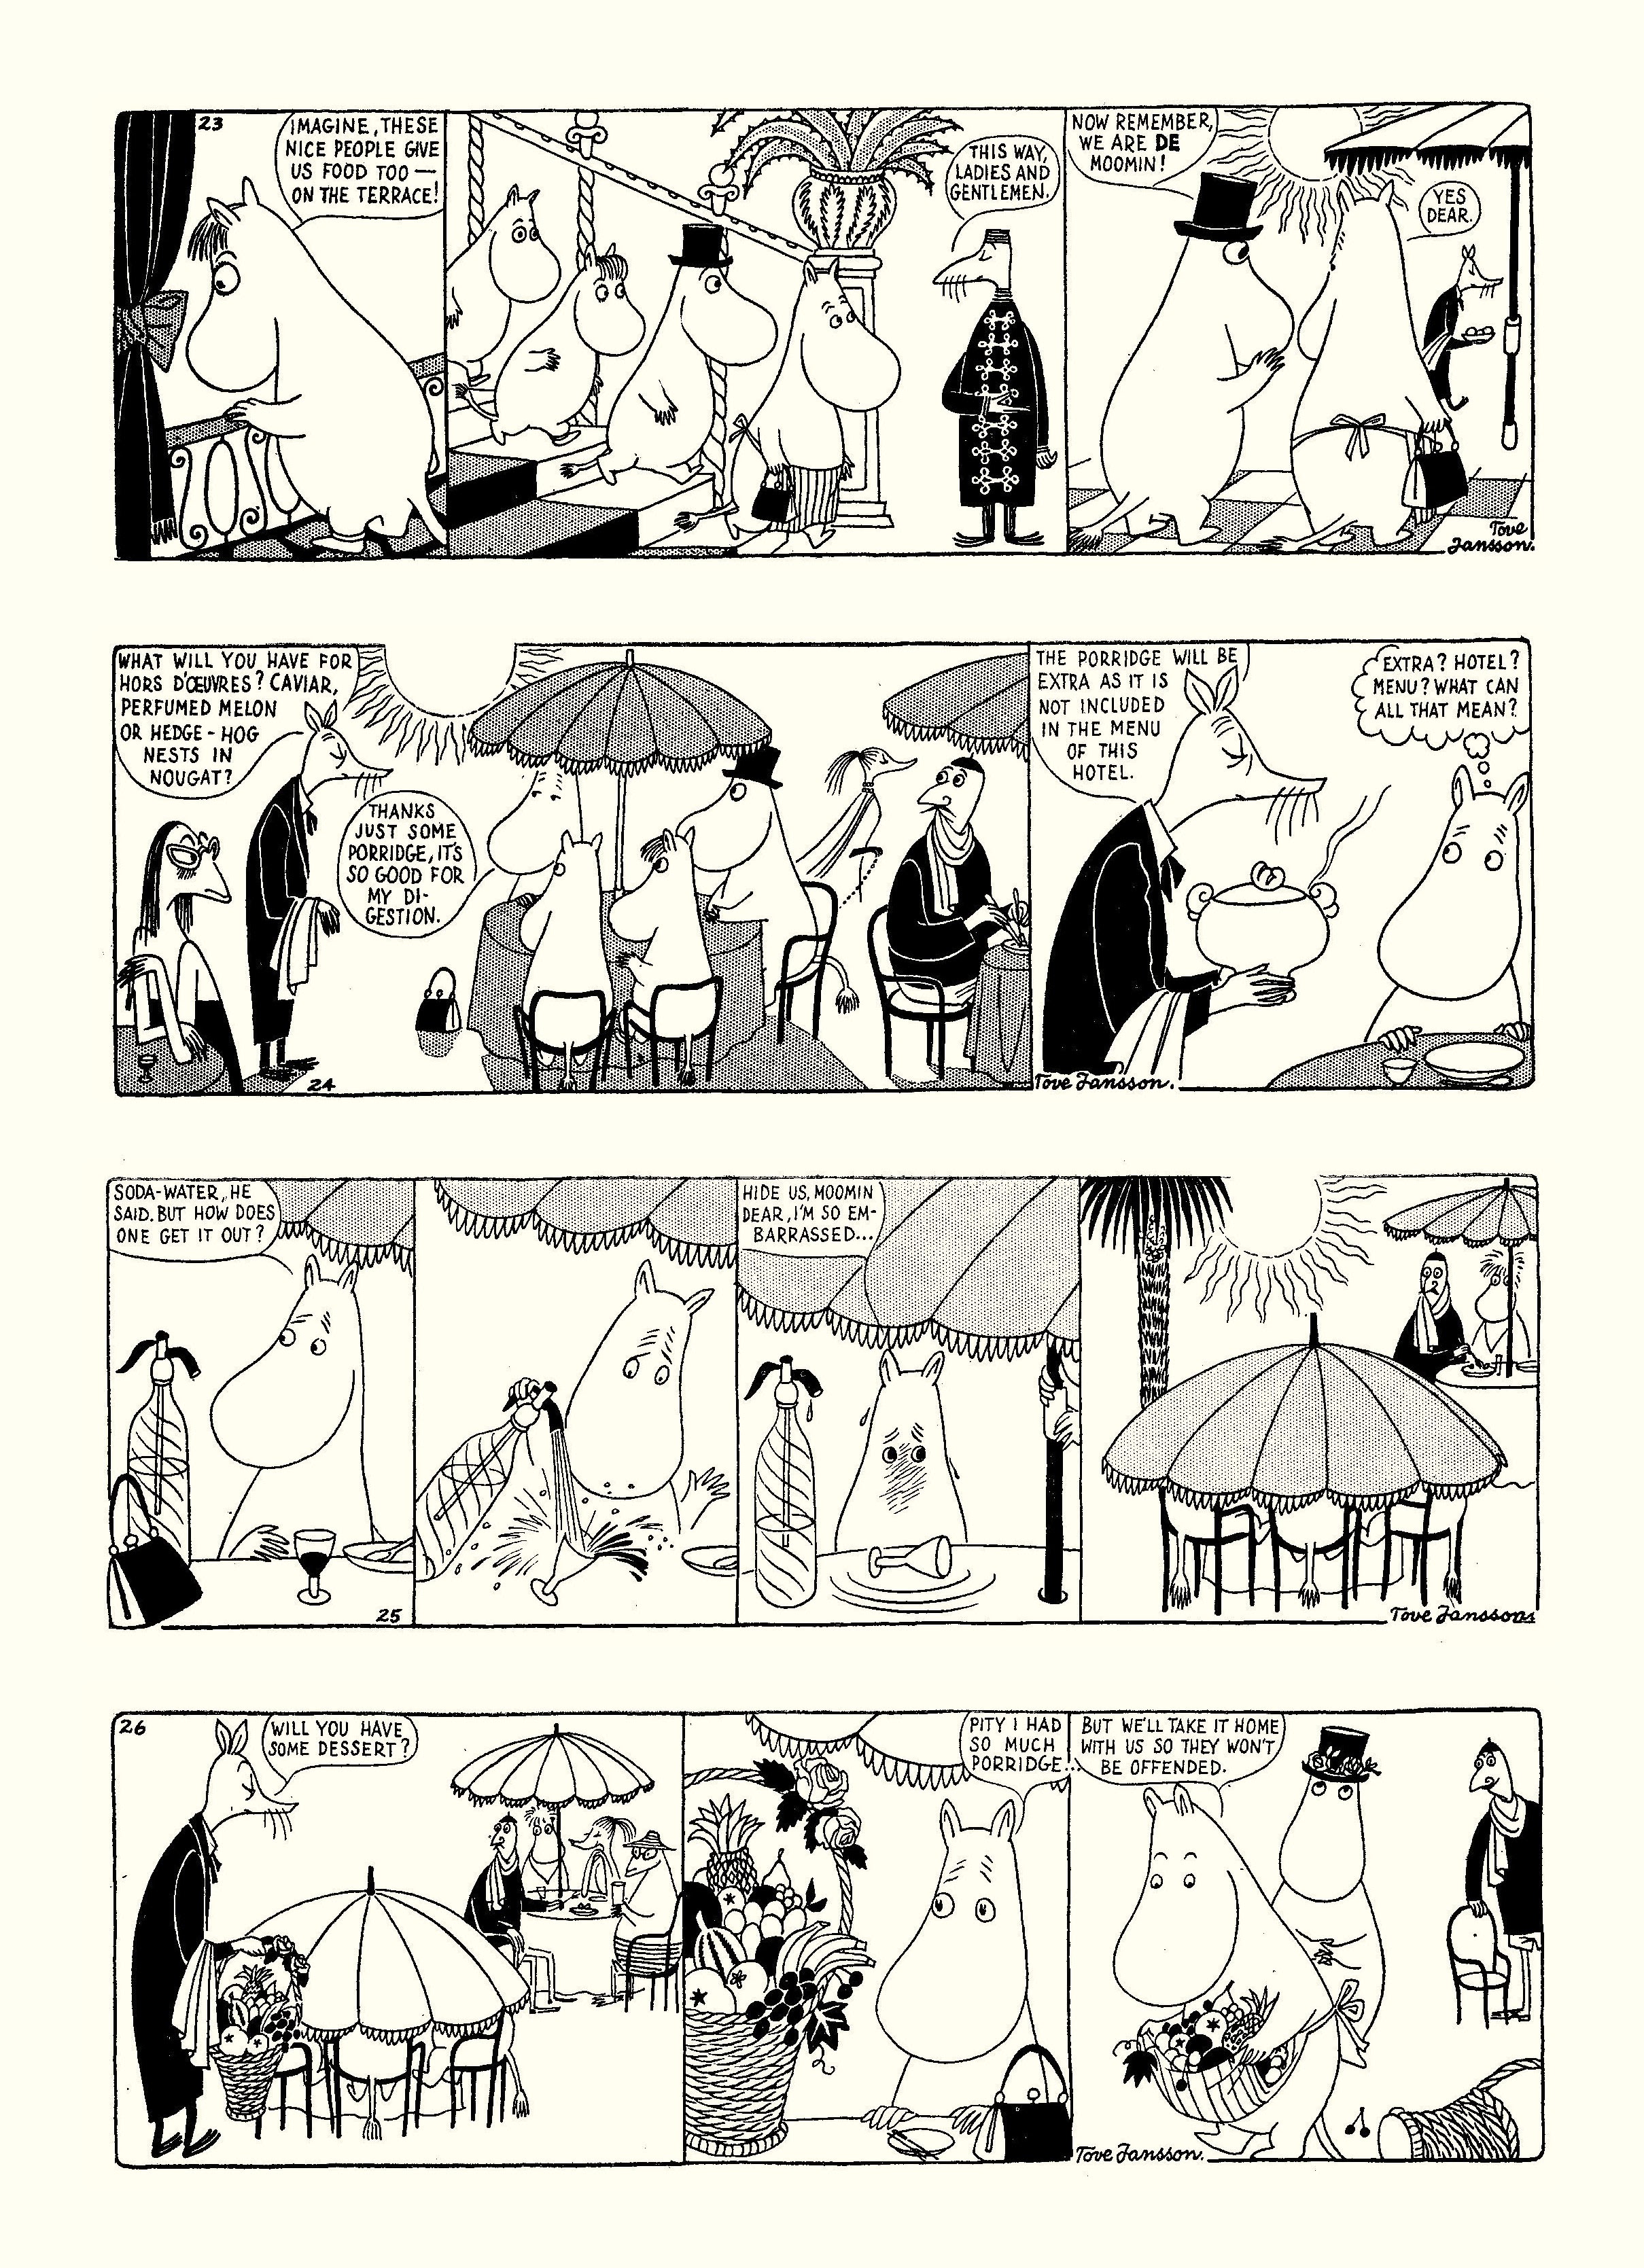 Read online Moomin: The Complete Tove Jansson Comic Strip comic -  Issue # TPB 1 - 54